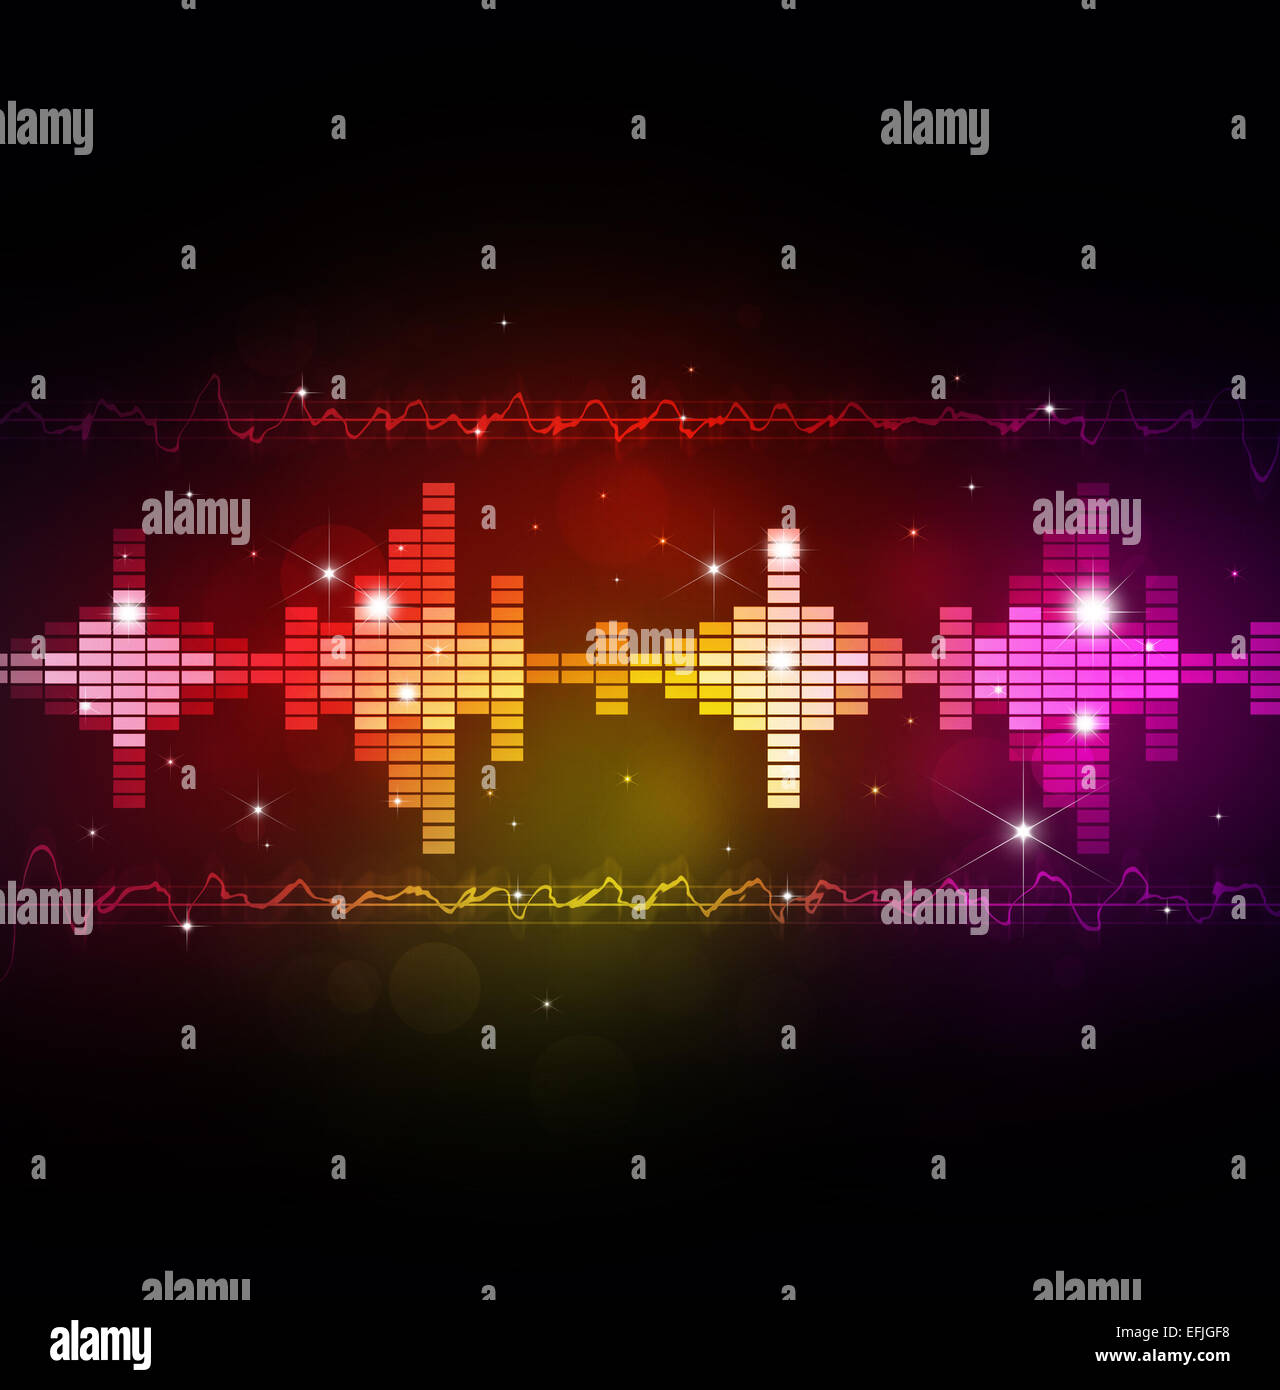 abstract music multicolor background with equalizer and music waves Stock Photo